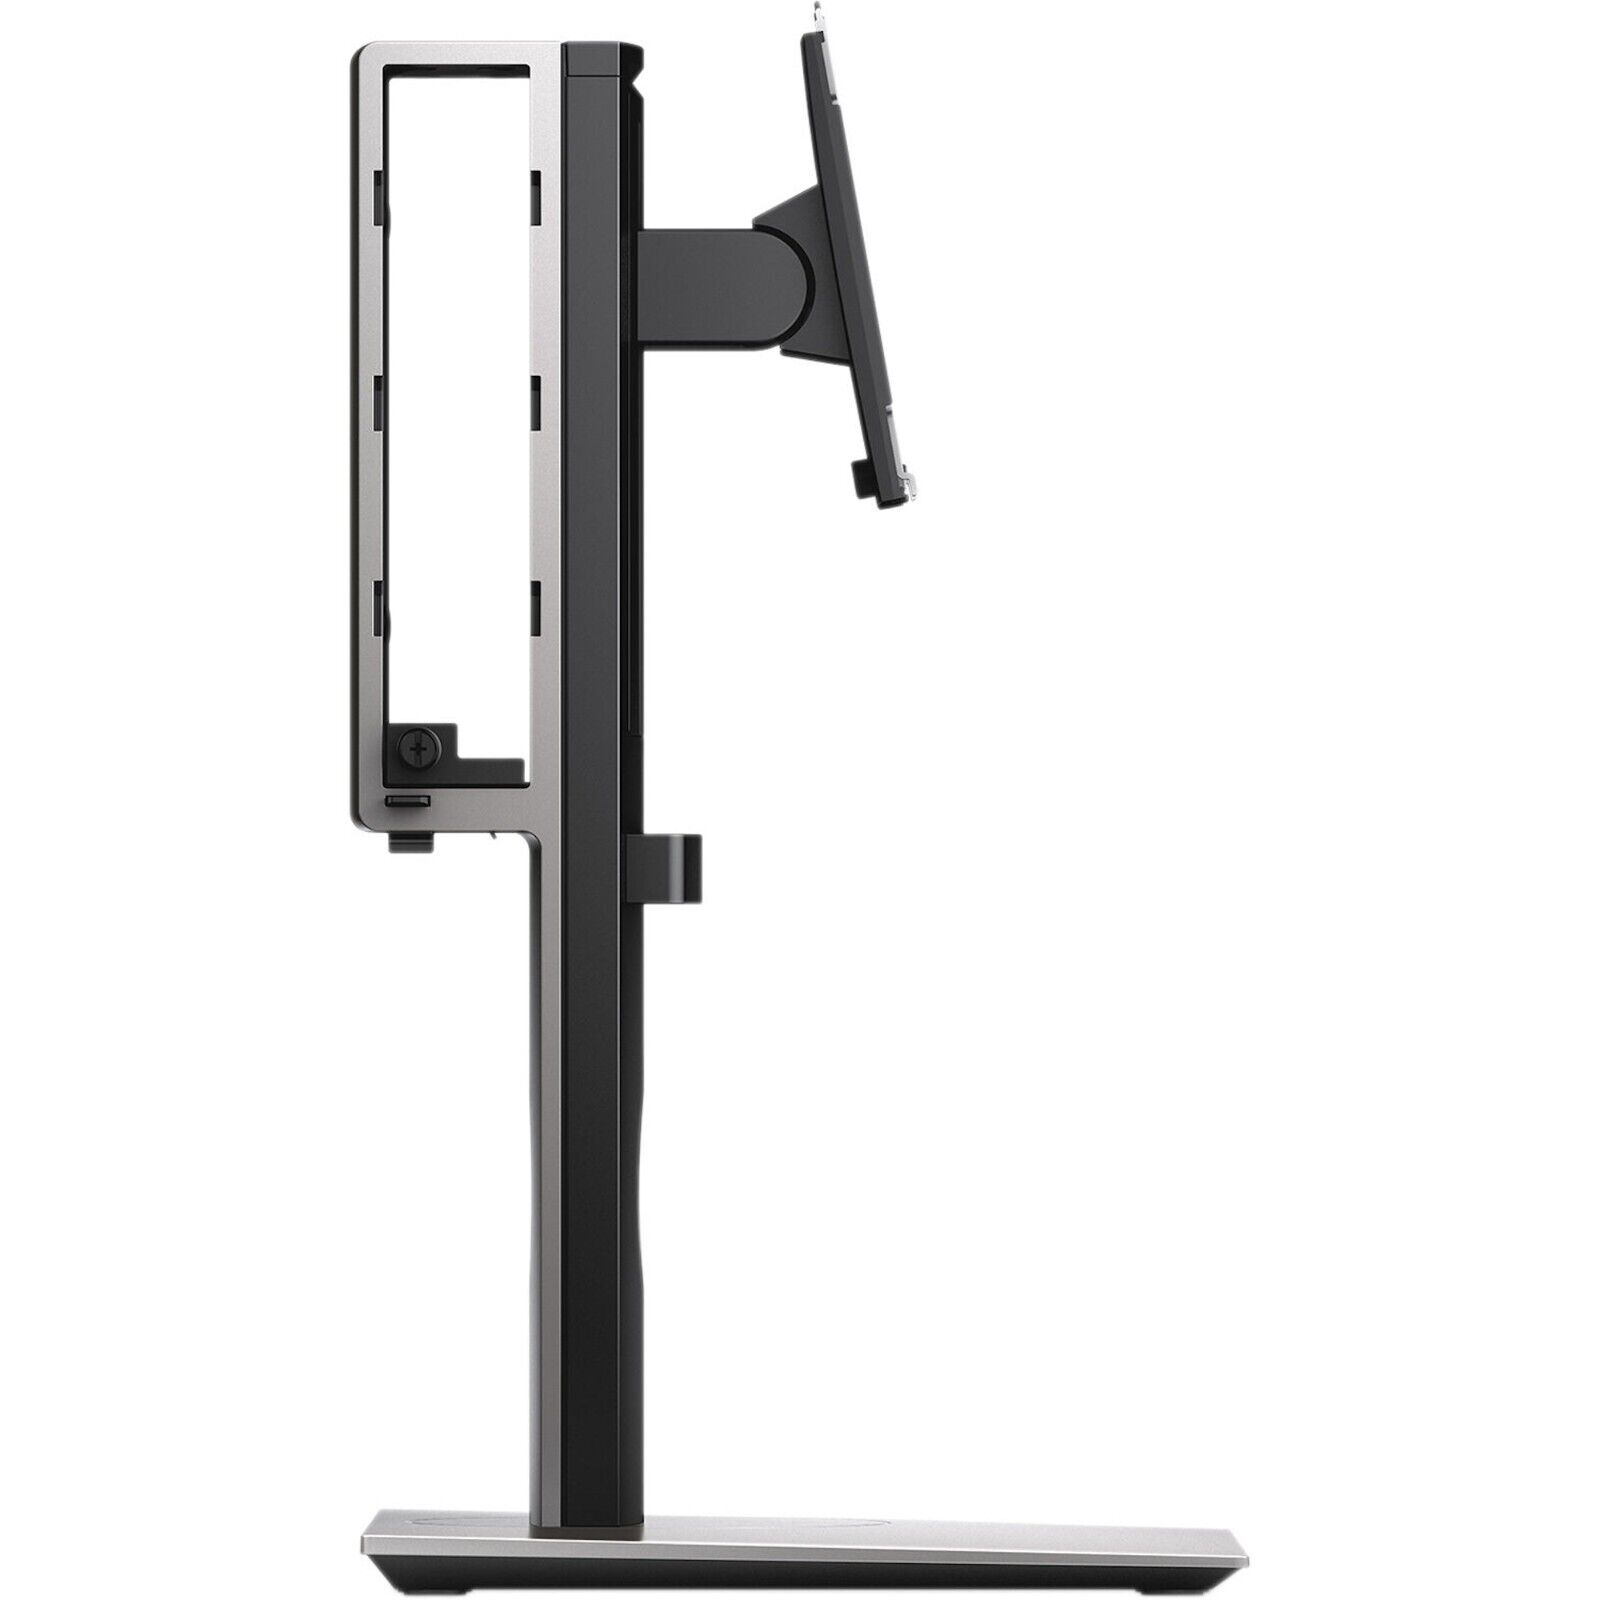 Dell MFS18 Micro Form Factor All-in-One (AIO) Desktop MONITOR MOUNT STAND ONLY